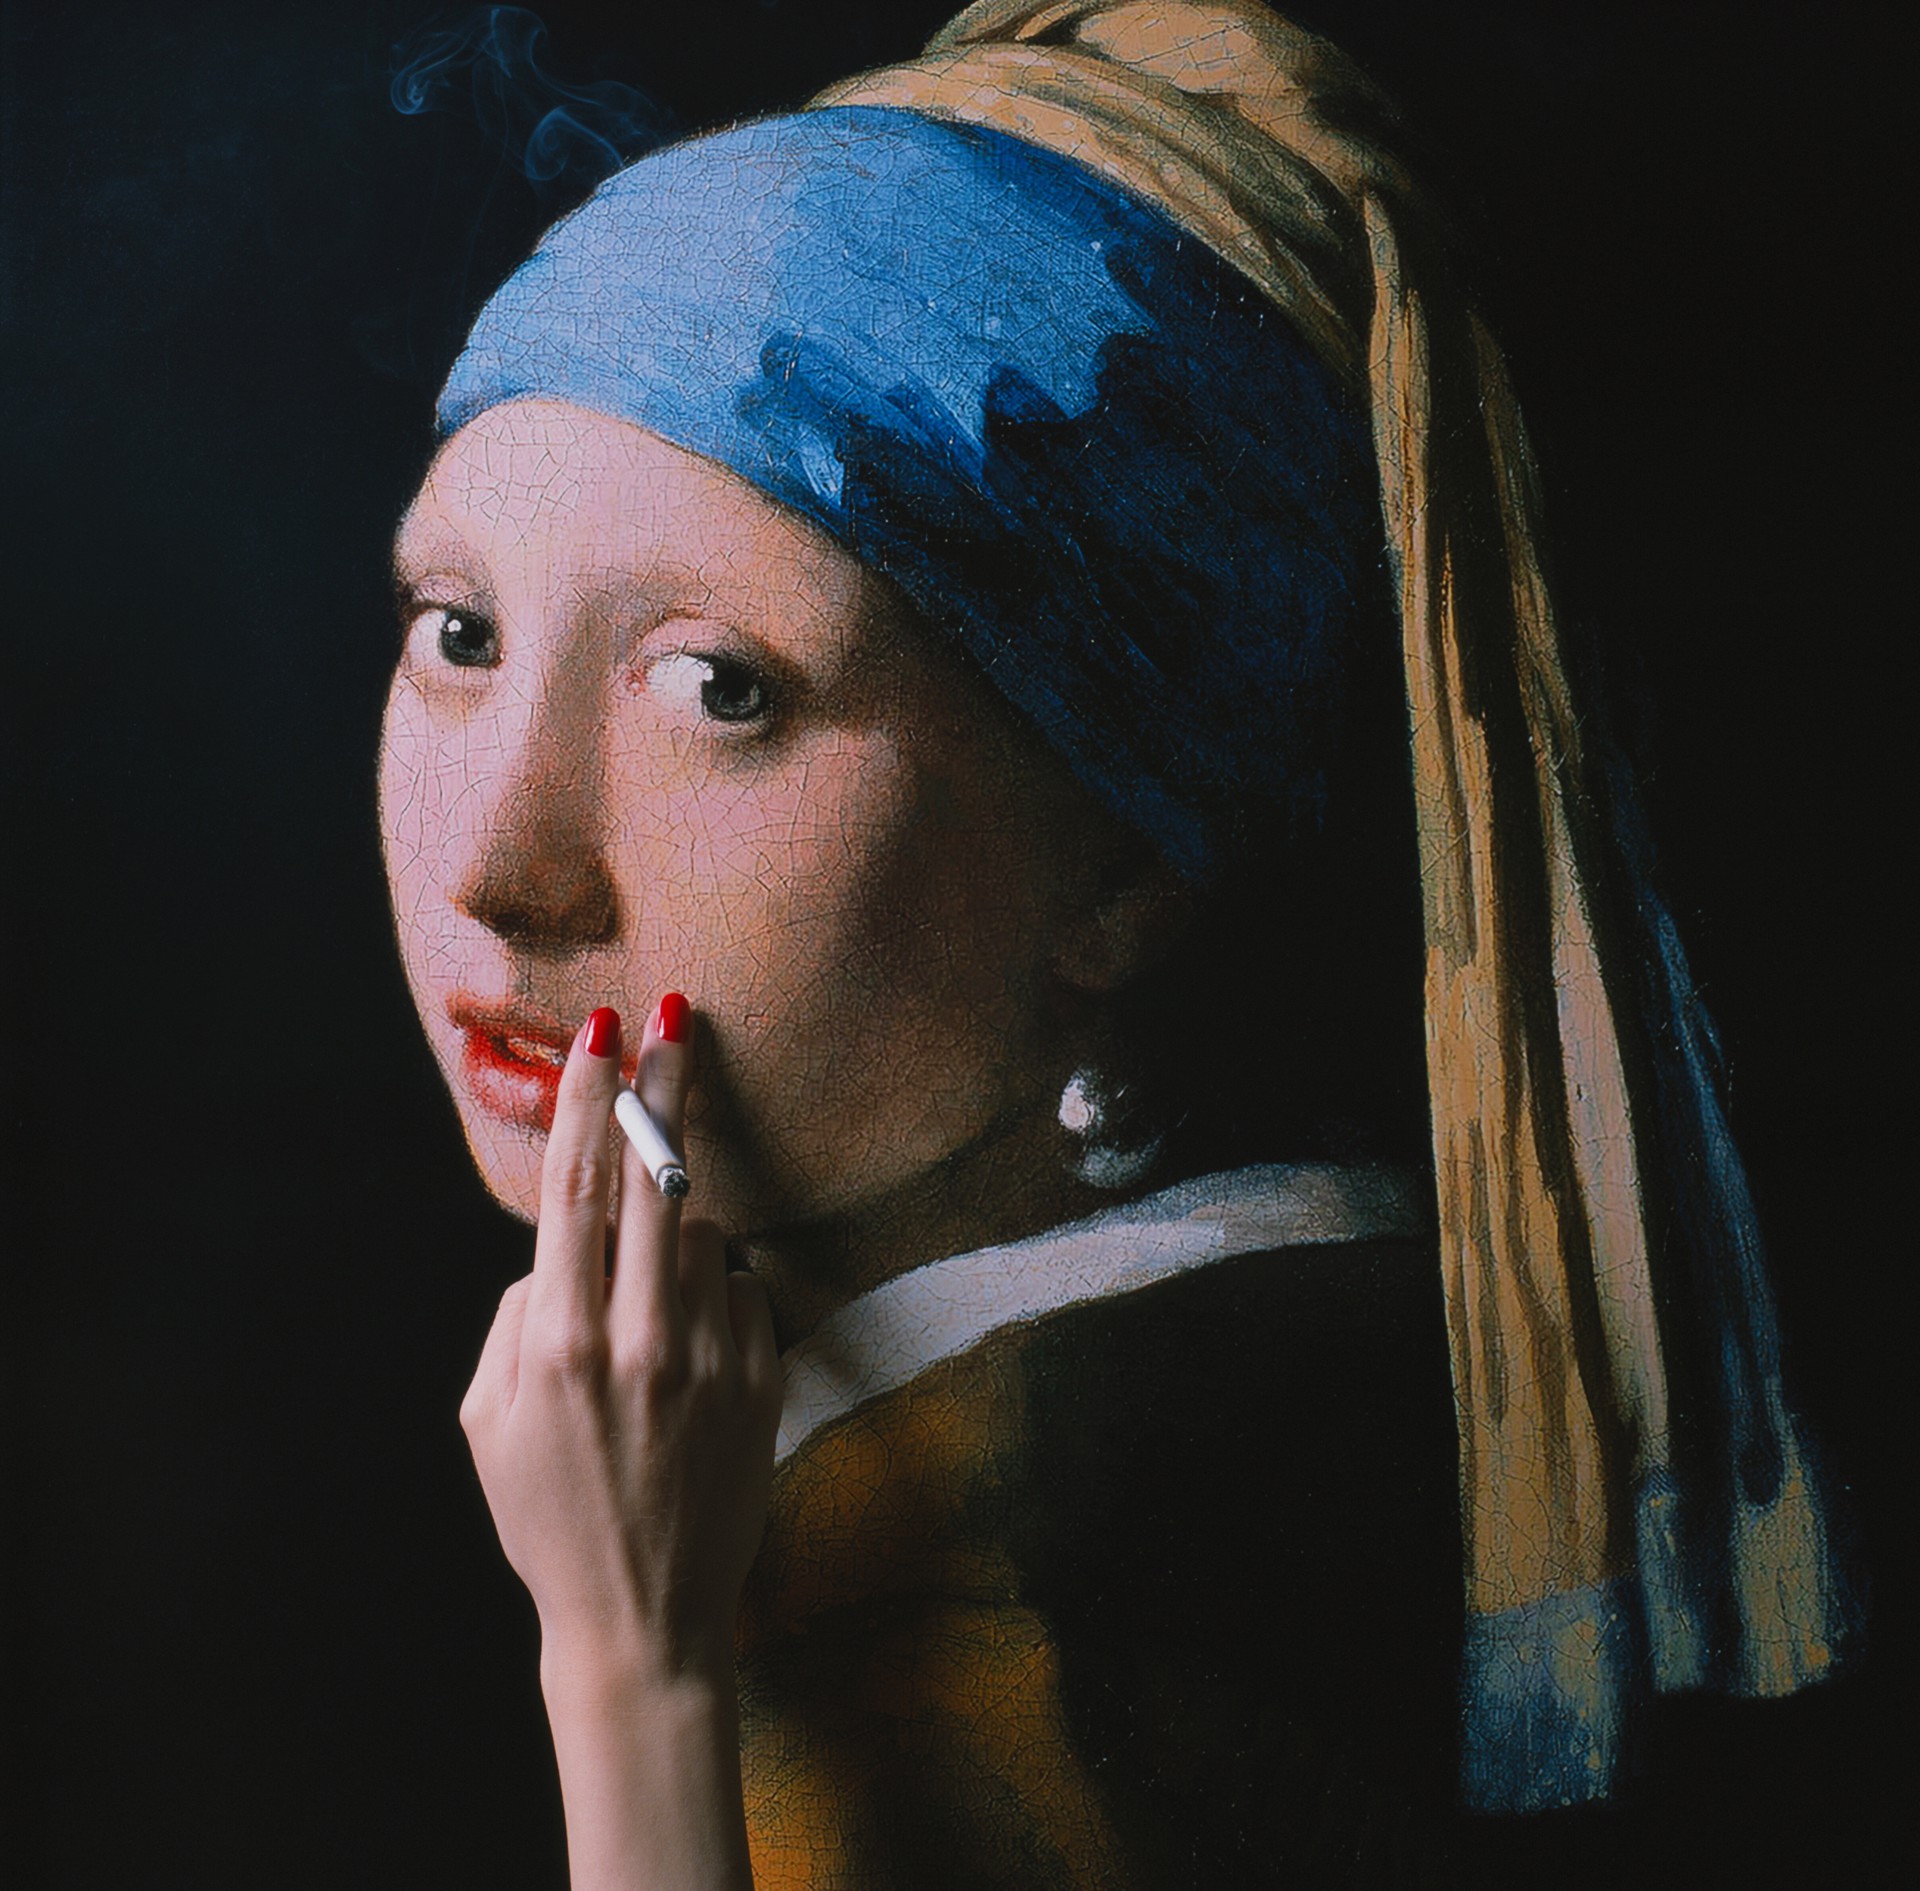 The Girl with the Pearl Earring by Tyler Shields